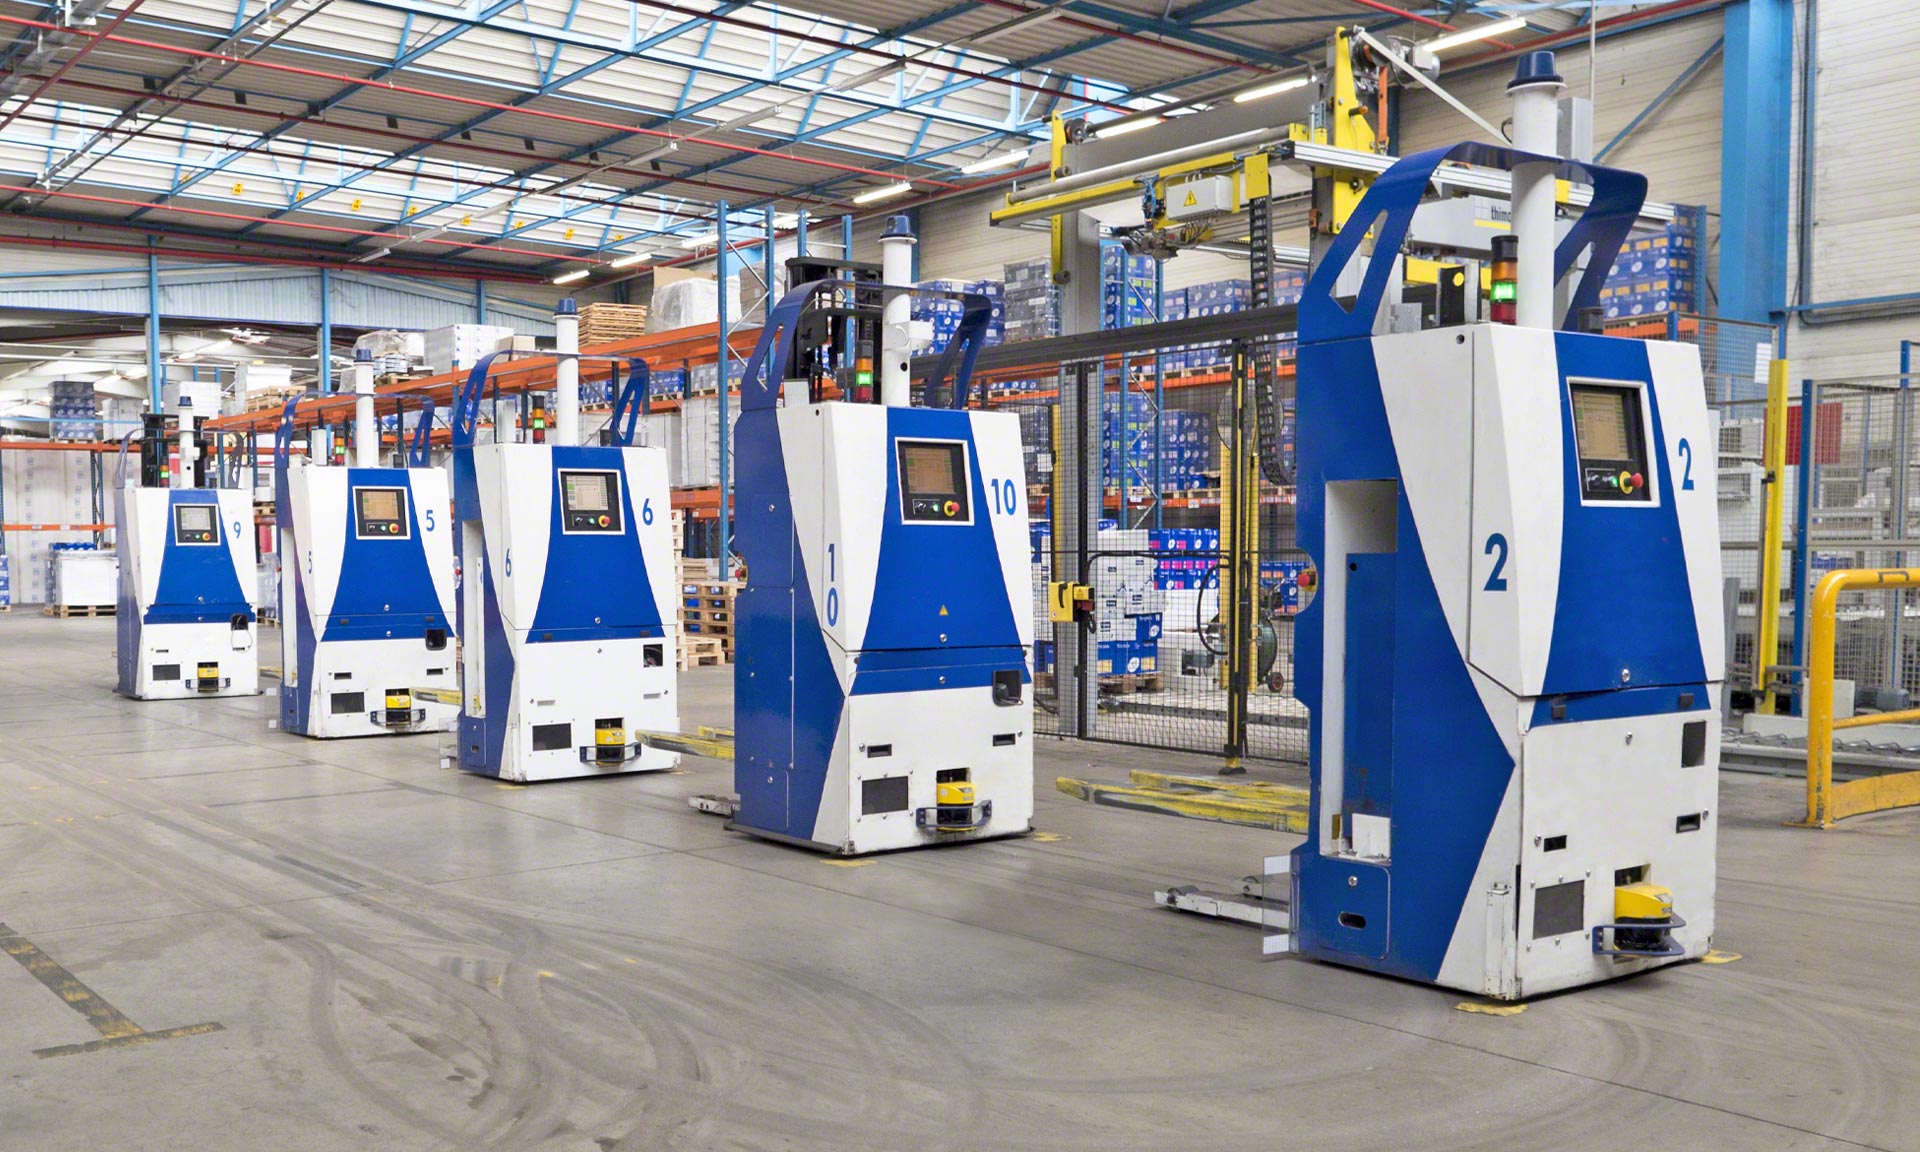 Automated guided vehicles warehouse: the need for speed